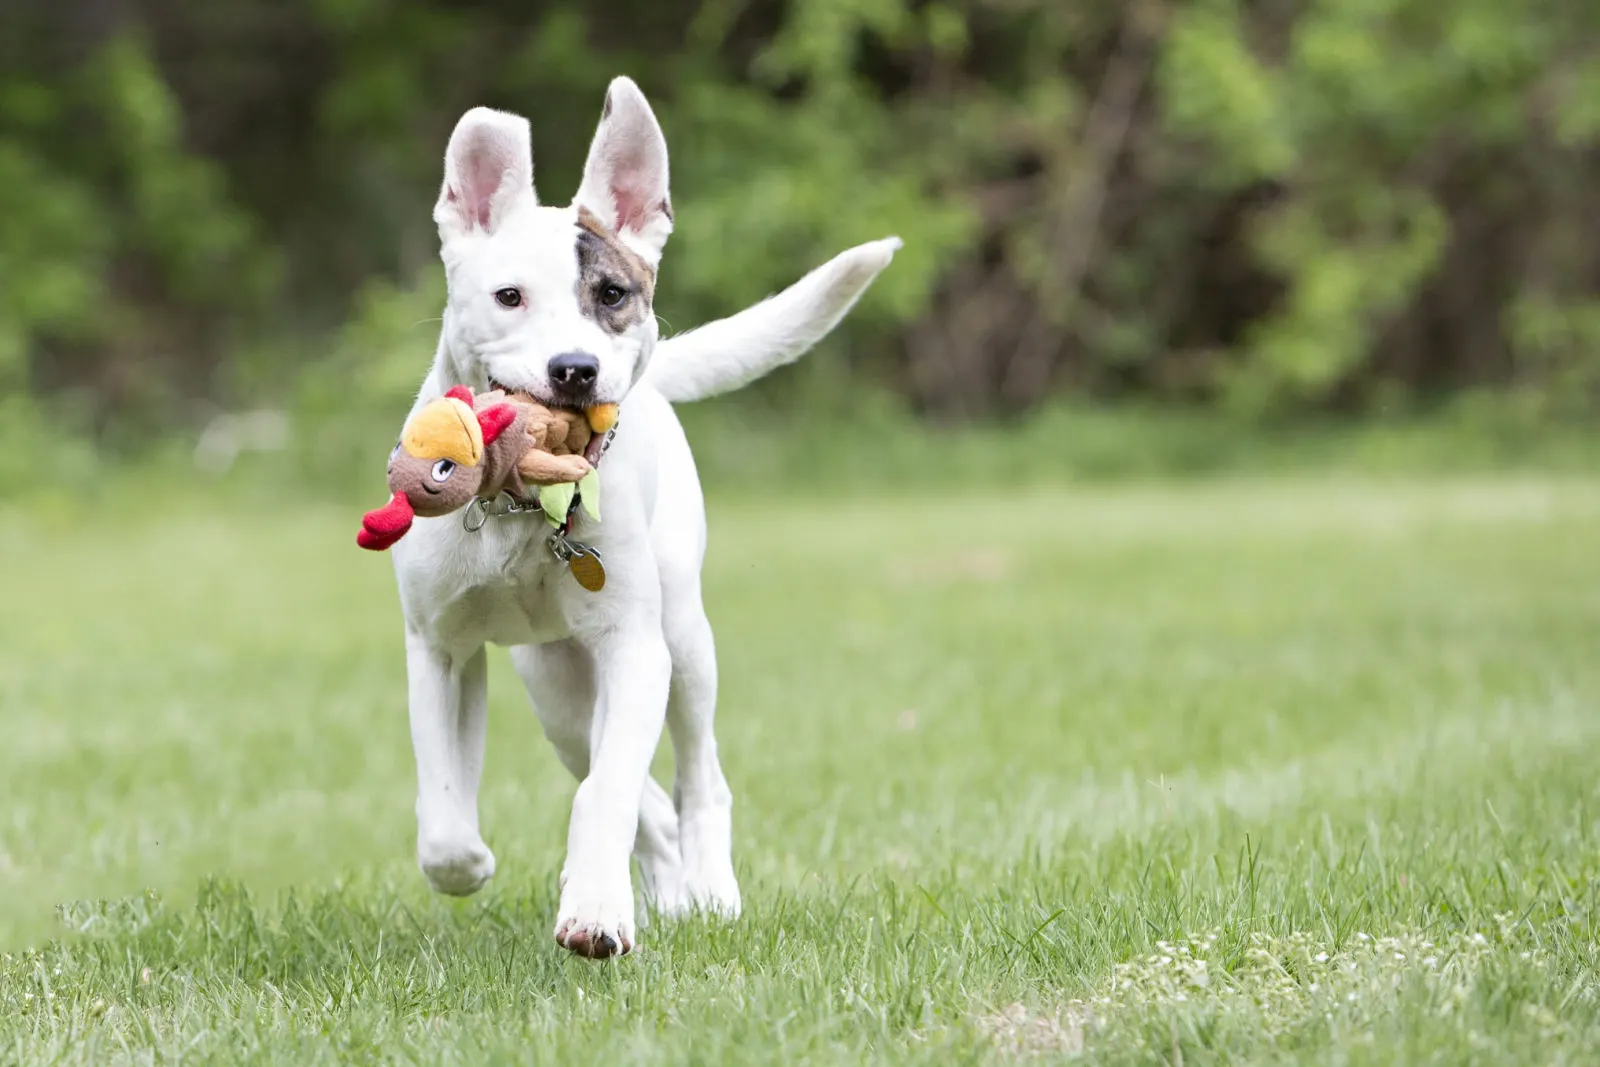 Pitbull dog playing with a toy running outside